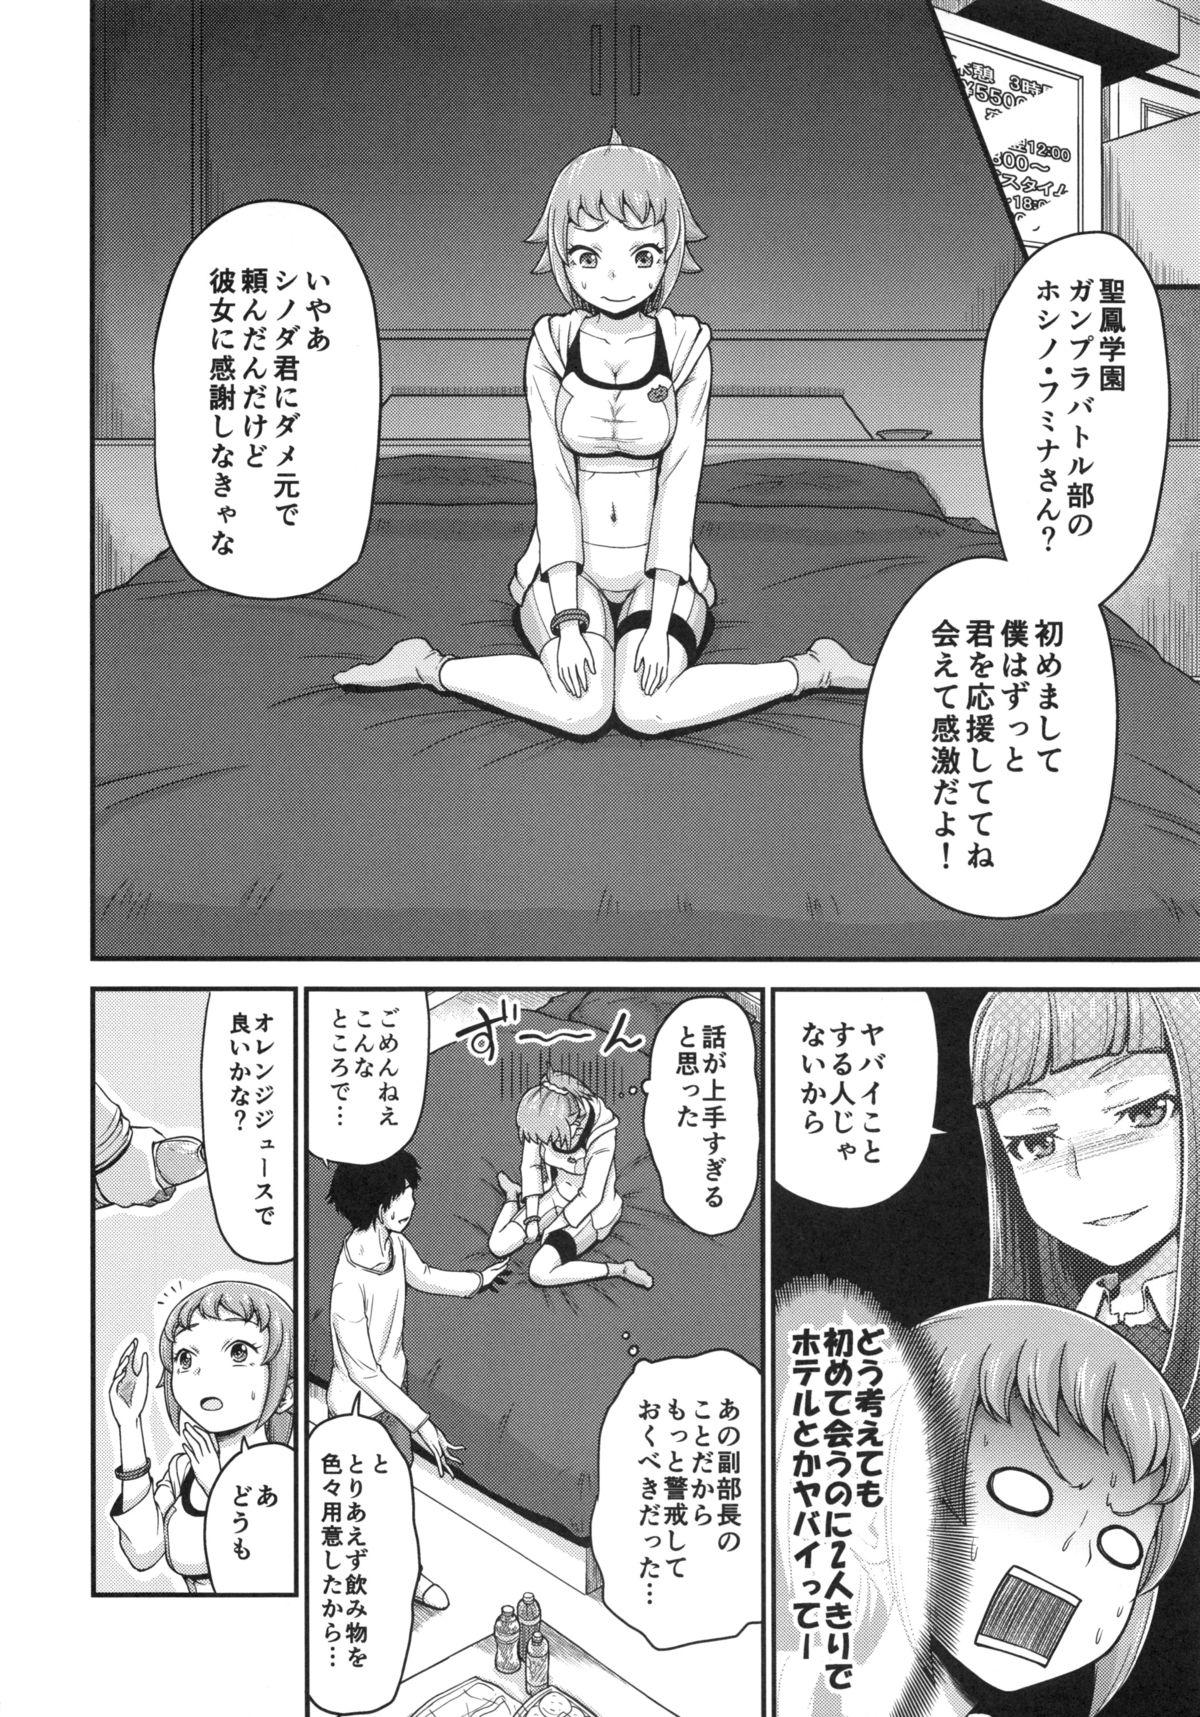 Eating Fuminax Try - Gundam build fighters try Milfporn - Page 3